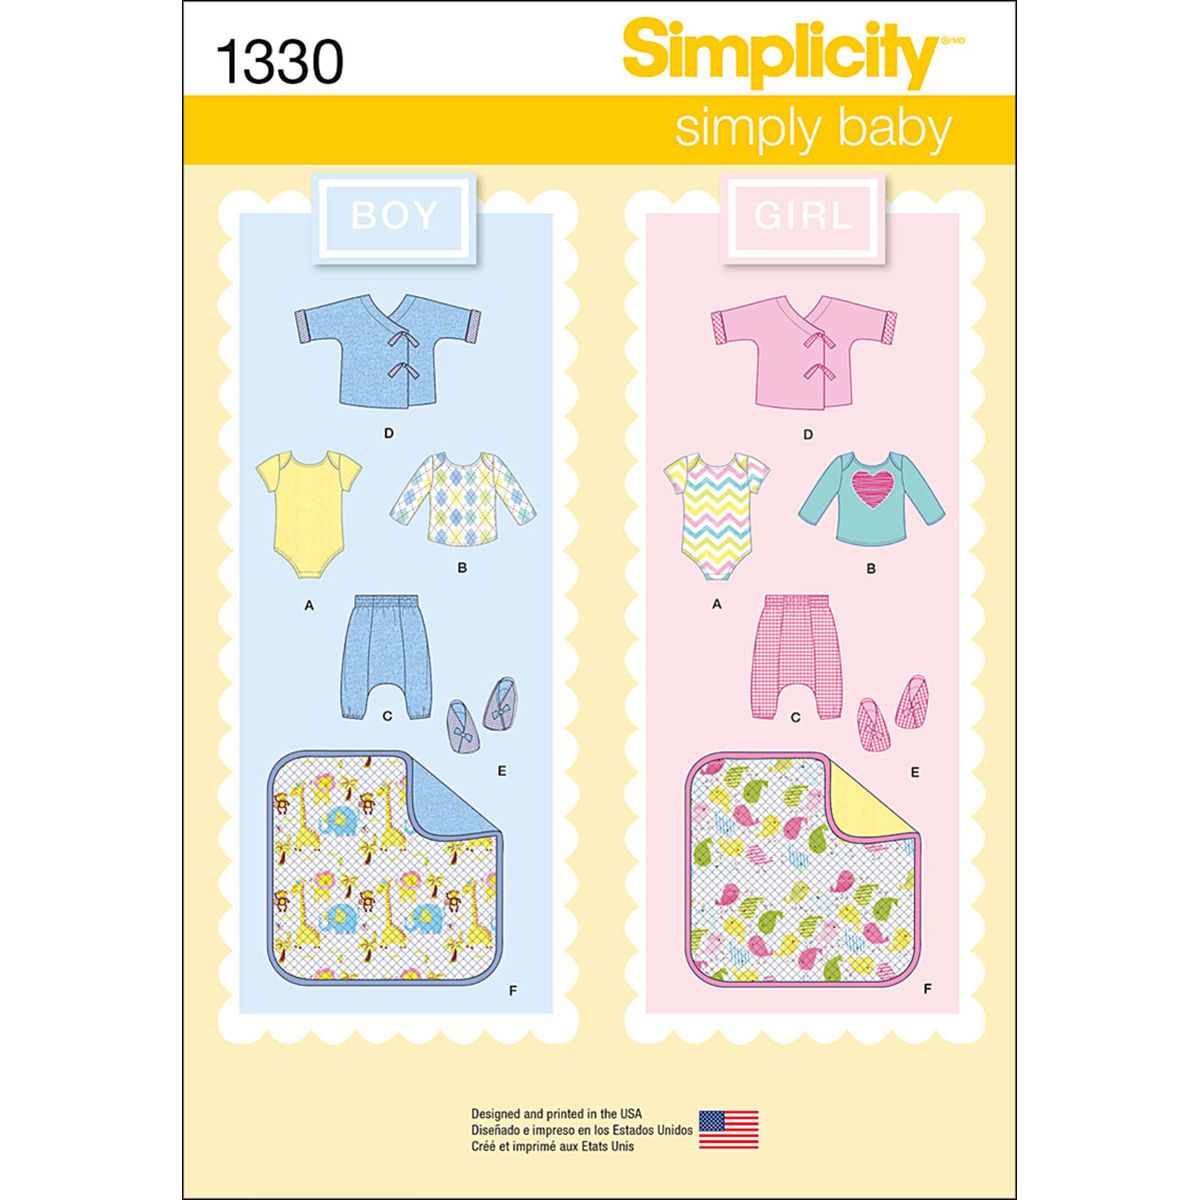 Simplicity 1330a - Simply Baby Set Pattern - Baby Sewing Pattern